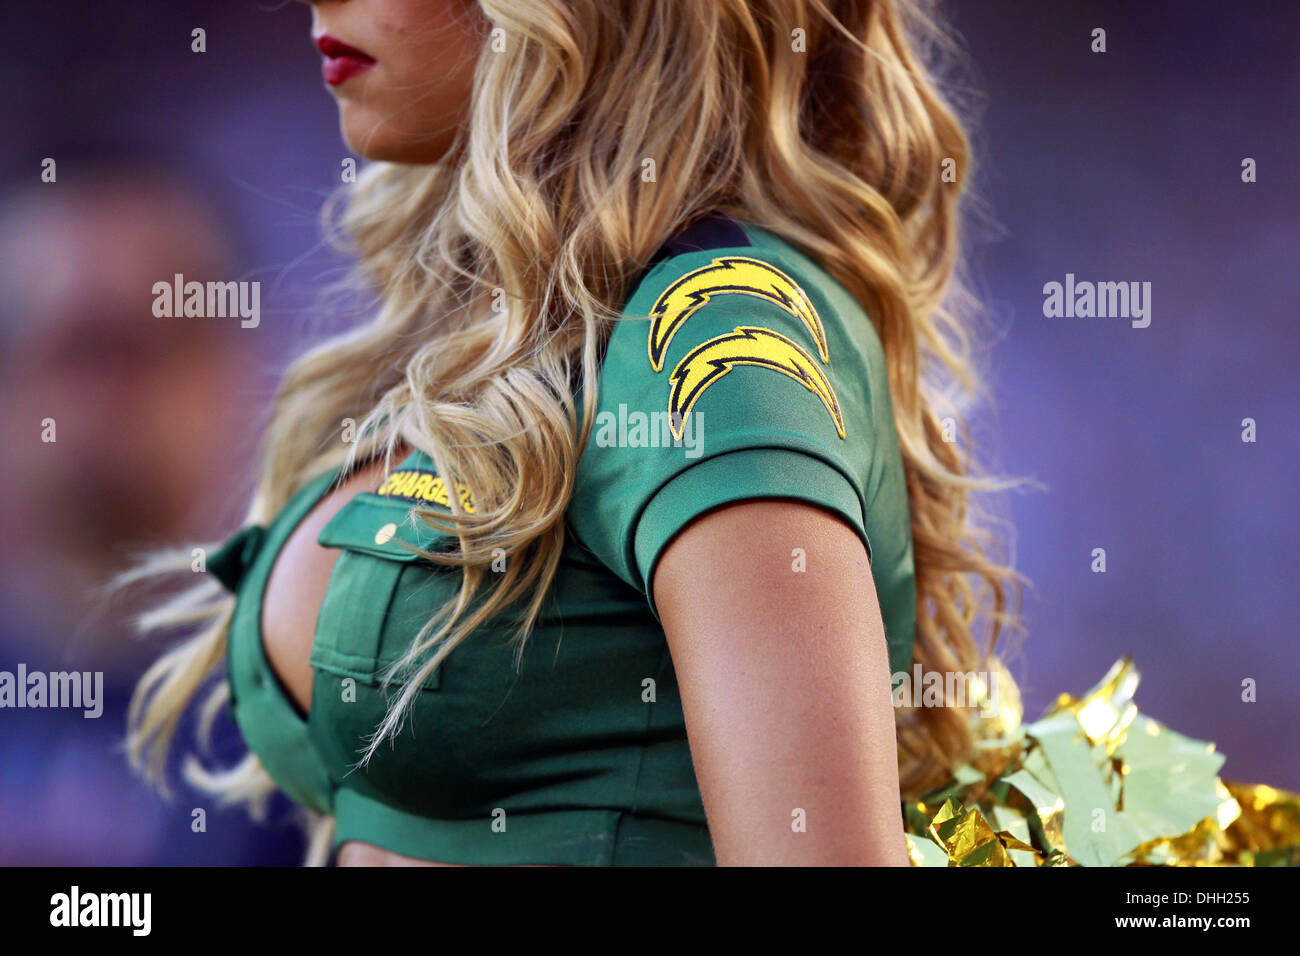 San Diego, CA, USA. 10th Nov, 2013. Nov. 10, 2013 - San Diego, California, USA - San Diego Chargers çheerleaders wore military outfits to honor Veteran's Day during a game against the Denver Broncos at Qualcomm Stadium. © KC Alfred/ZUMAPRESS.com/Alamy Live News Stock Photo